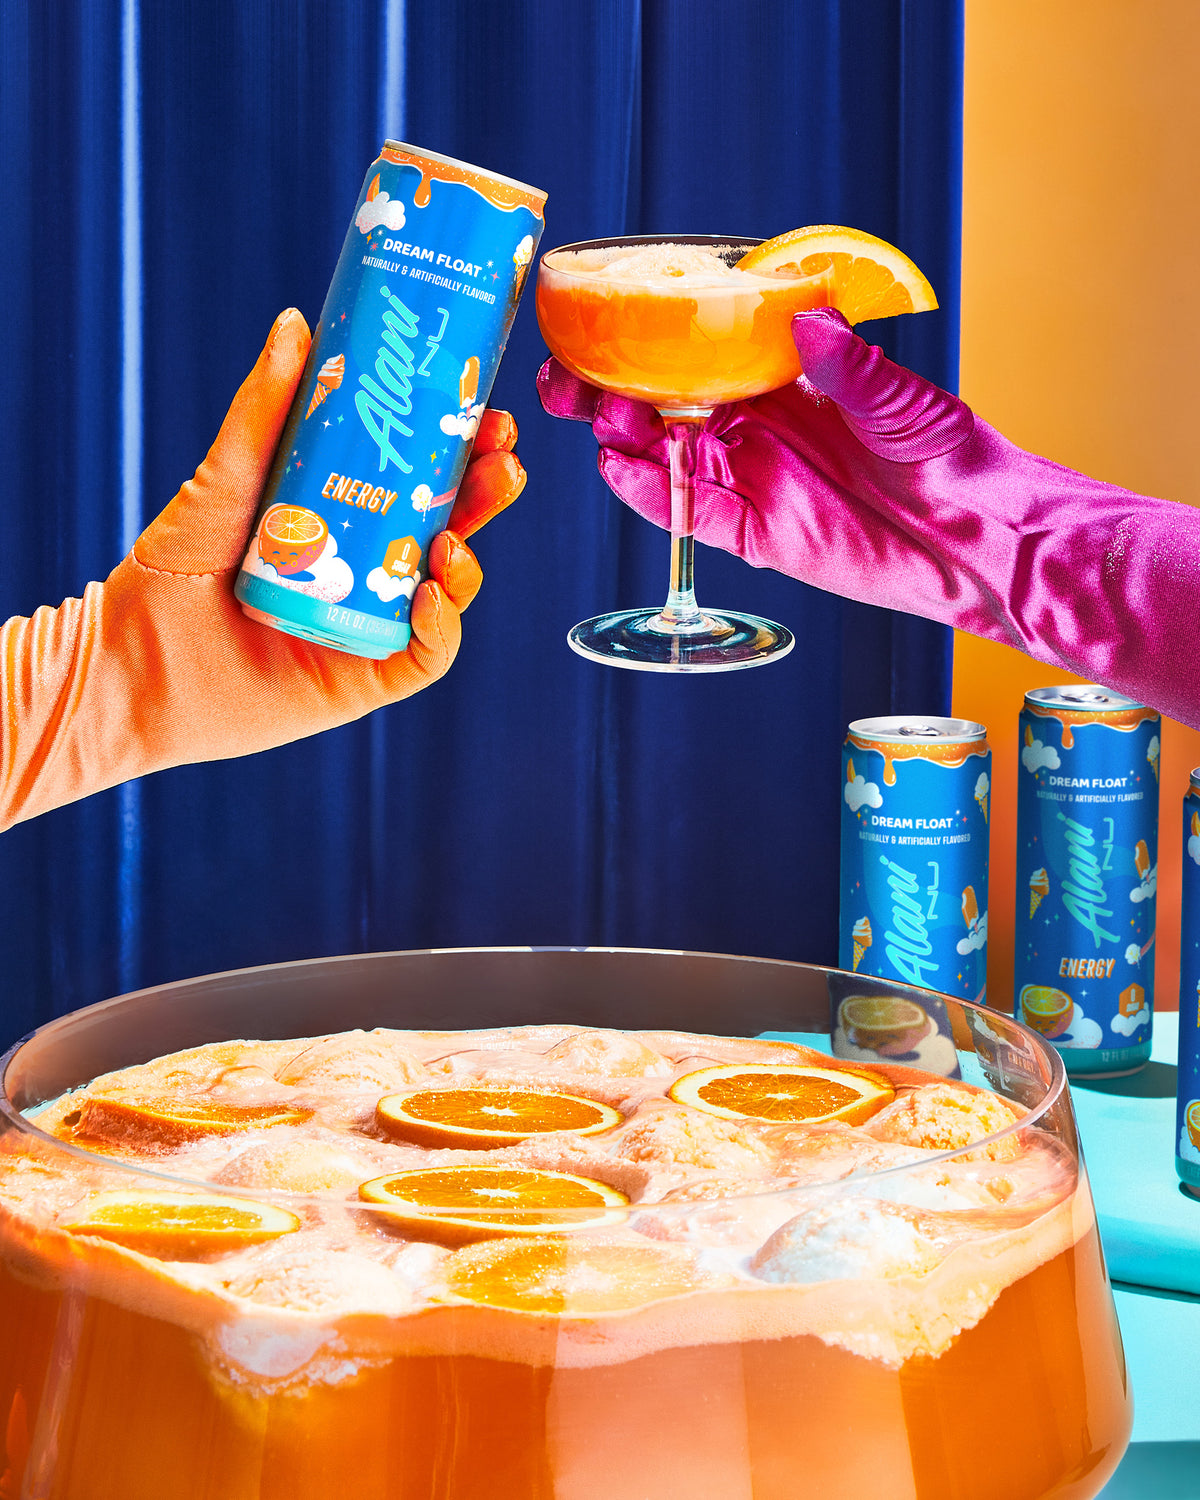 A energy drink in Dream Float flavor displayed next to person holding a glass filled with oranges and juice container.